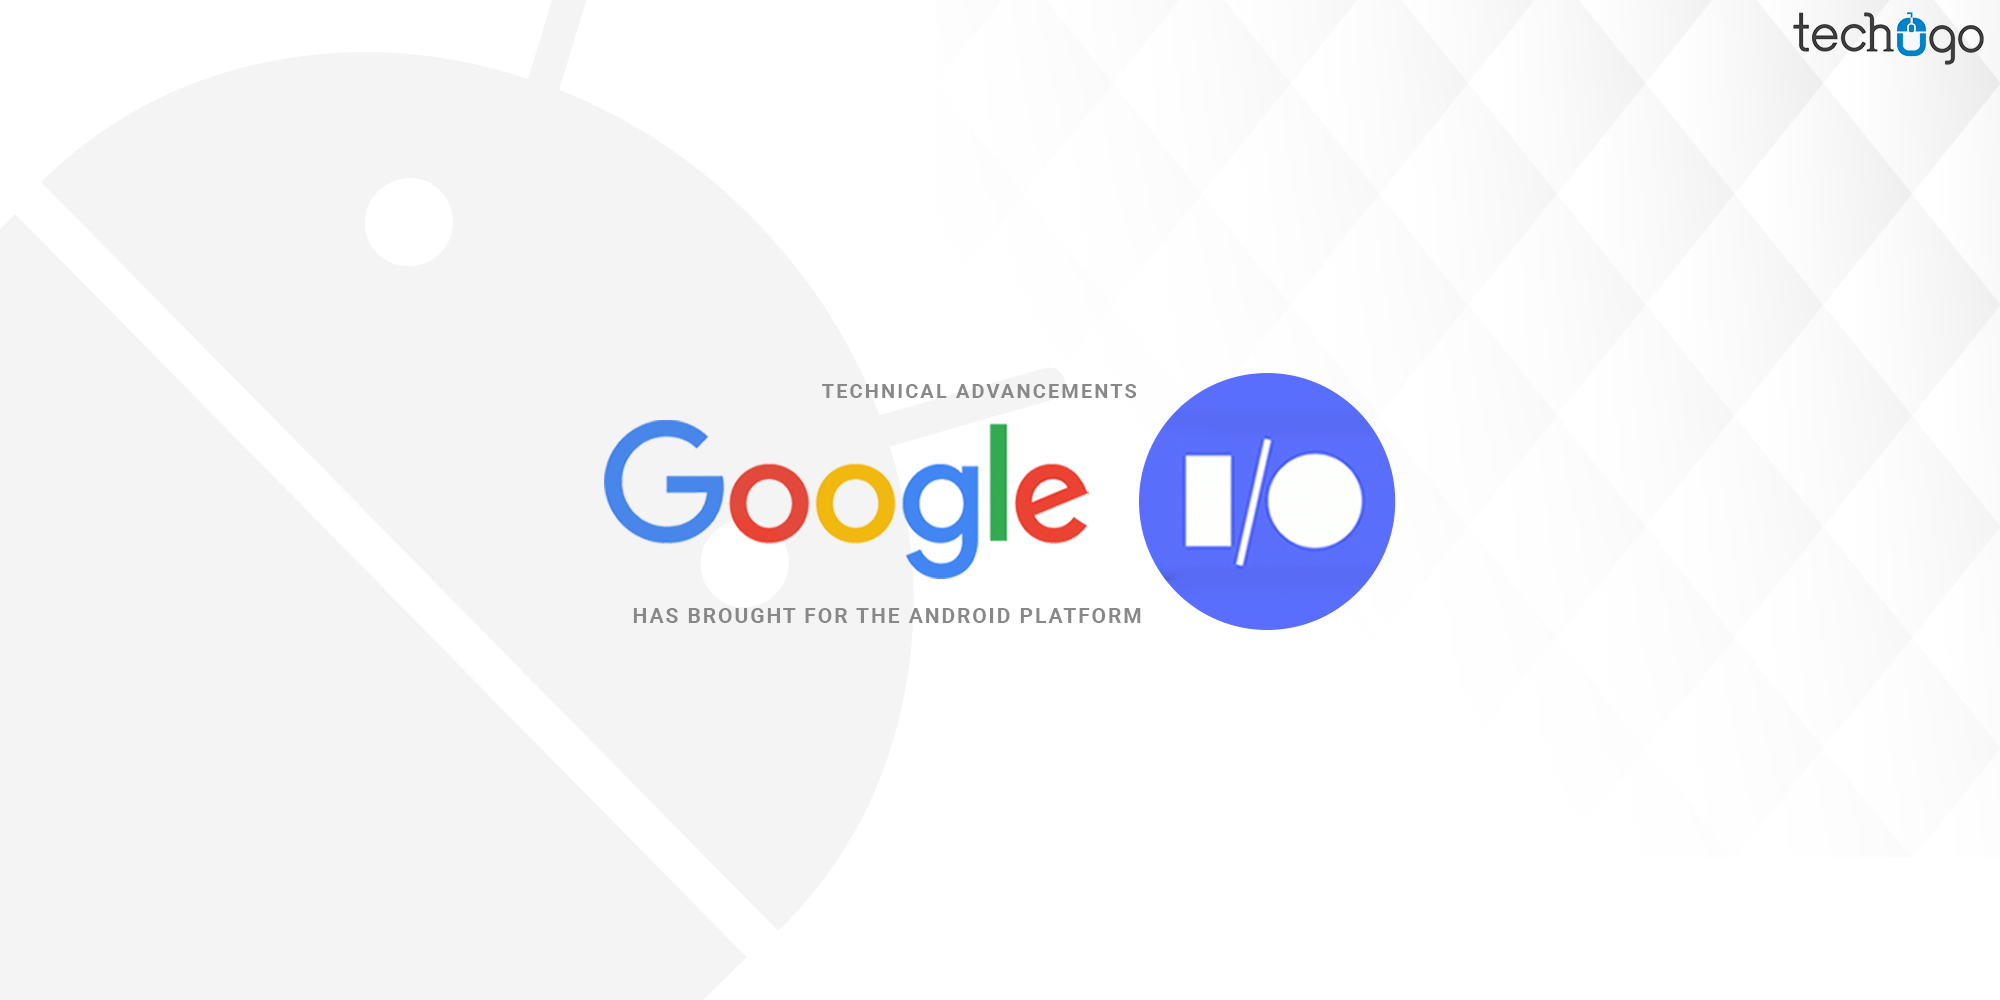 Technical Advancements Google I/O Has Brought For The Android Platform